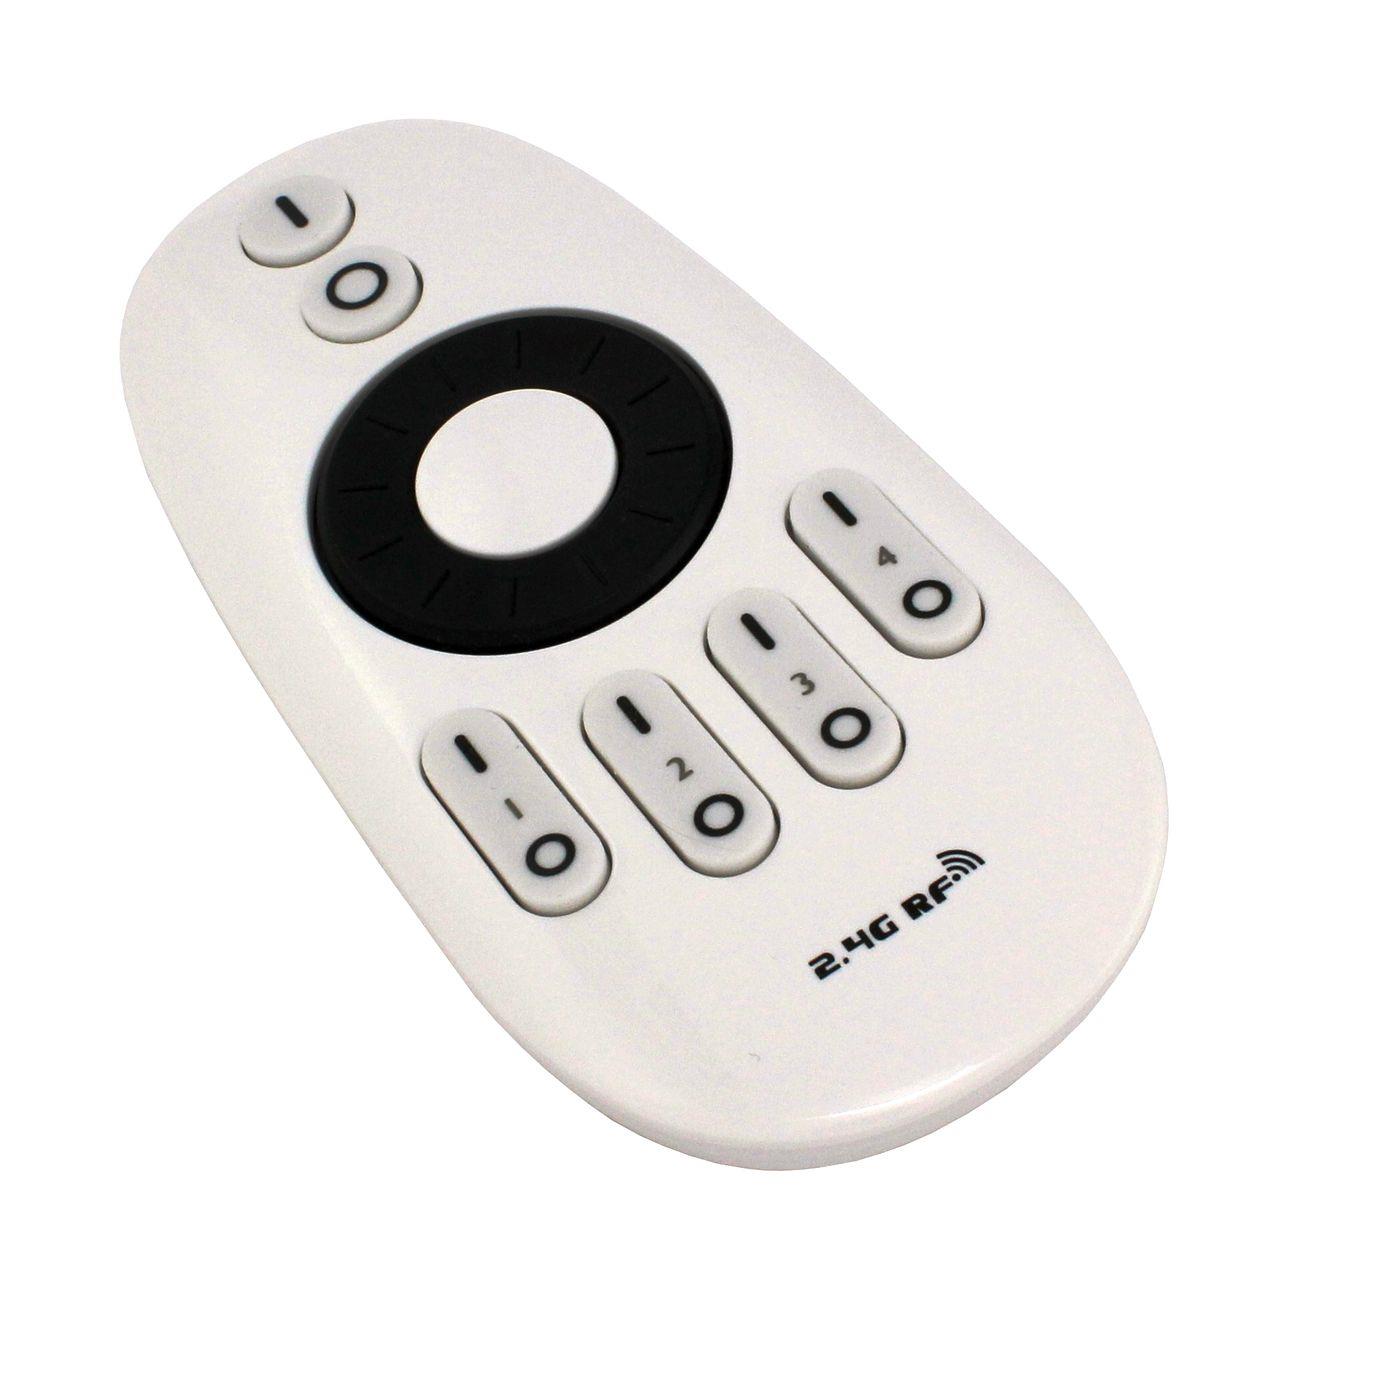 MiLight MiBoxer LED 4-Zone Remote control Touch 2,4GHz White for single-colour LED strips 2-Pin